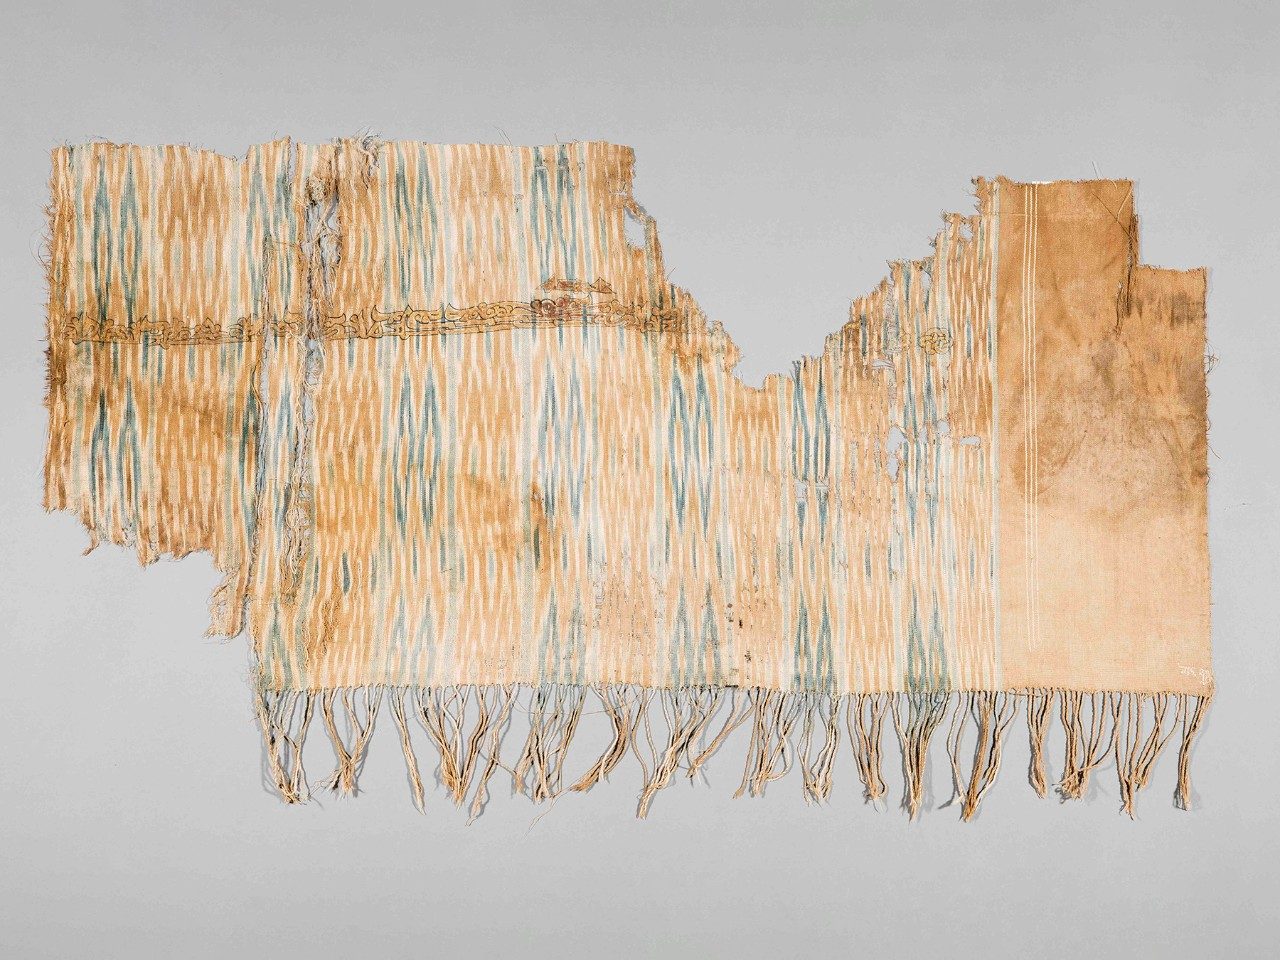 Blue and tan patterned textile with gold a line of text across the upper portion and fringe along the bottom.